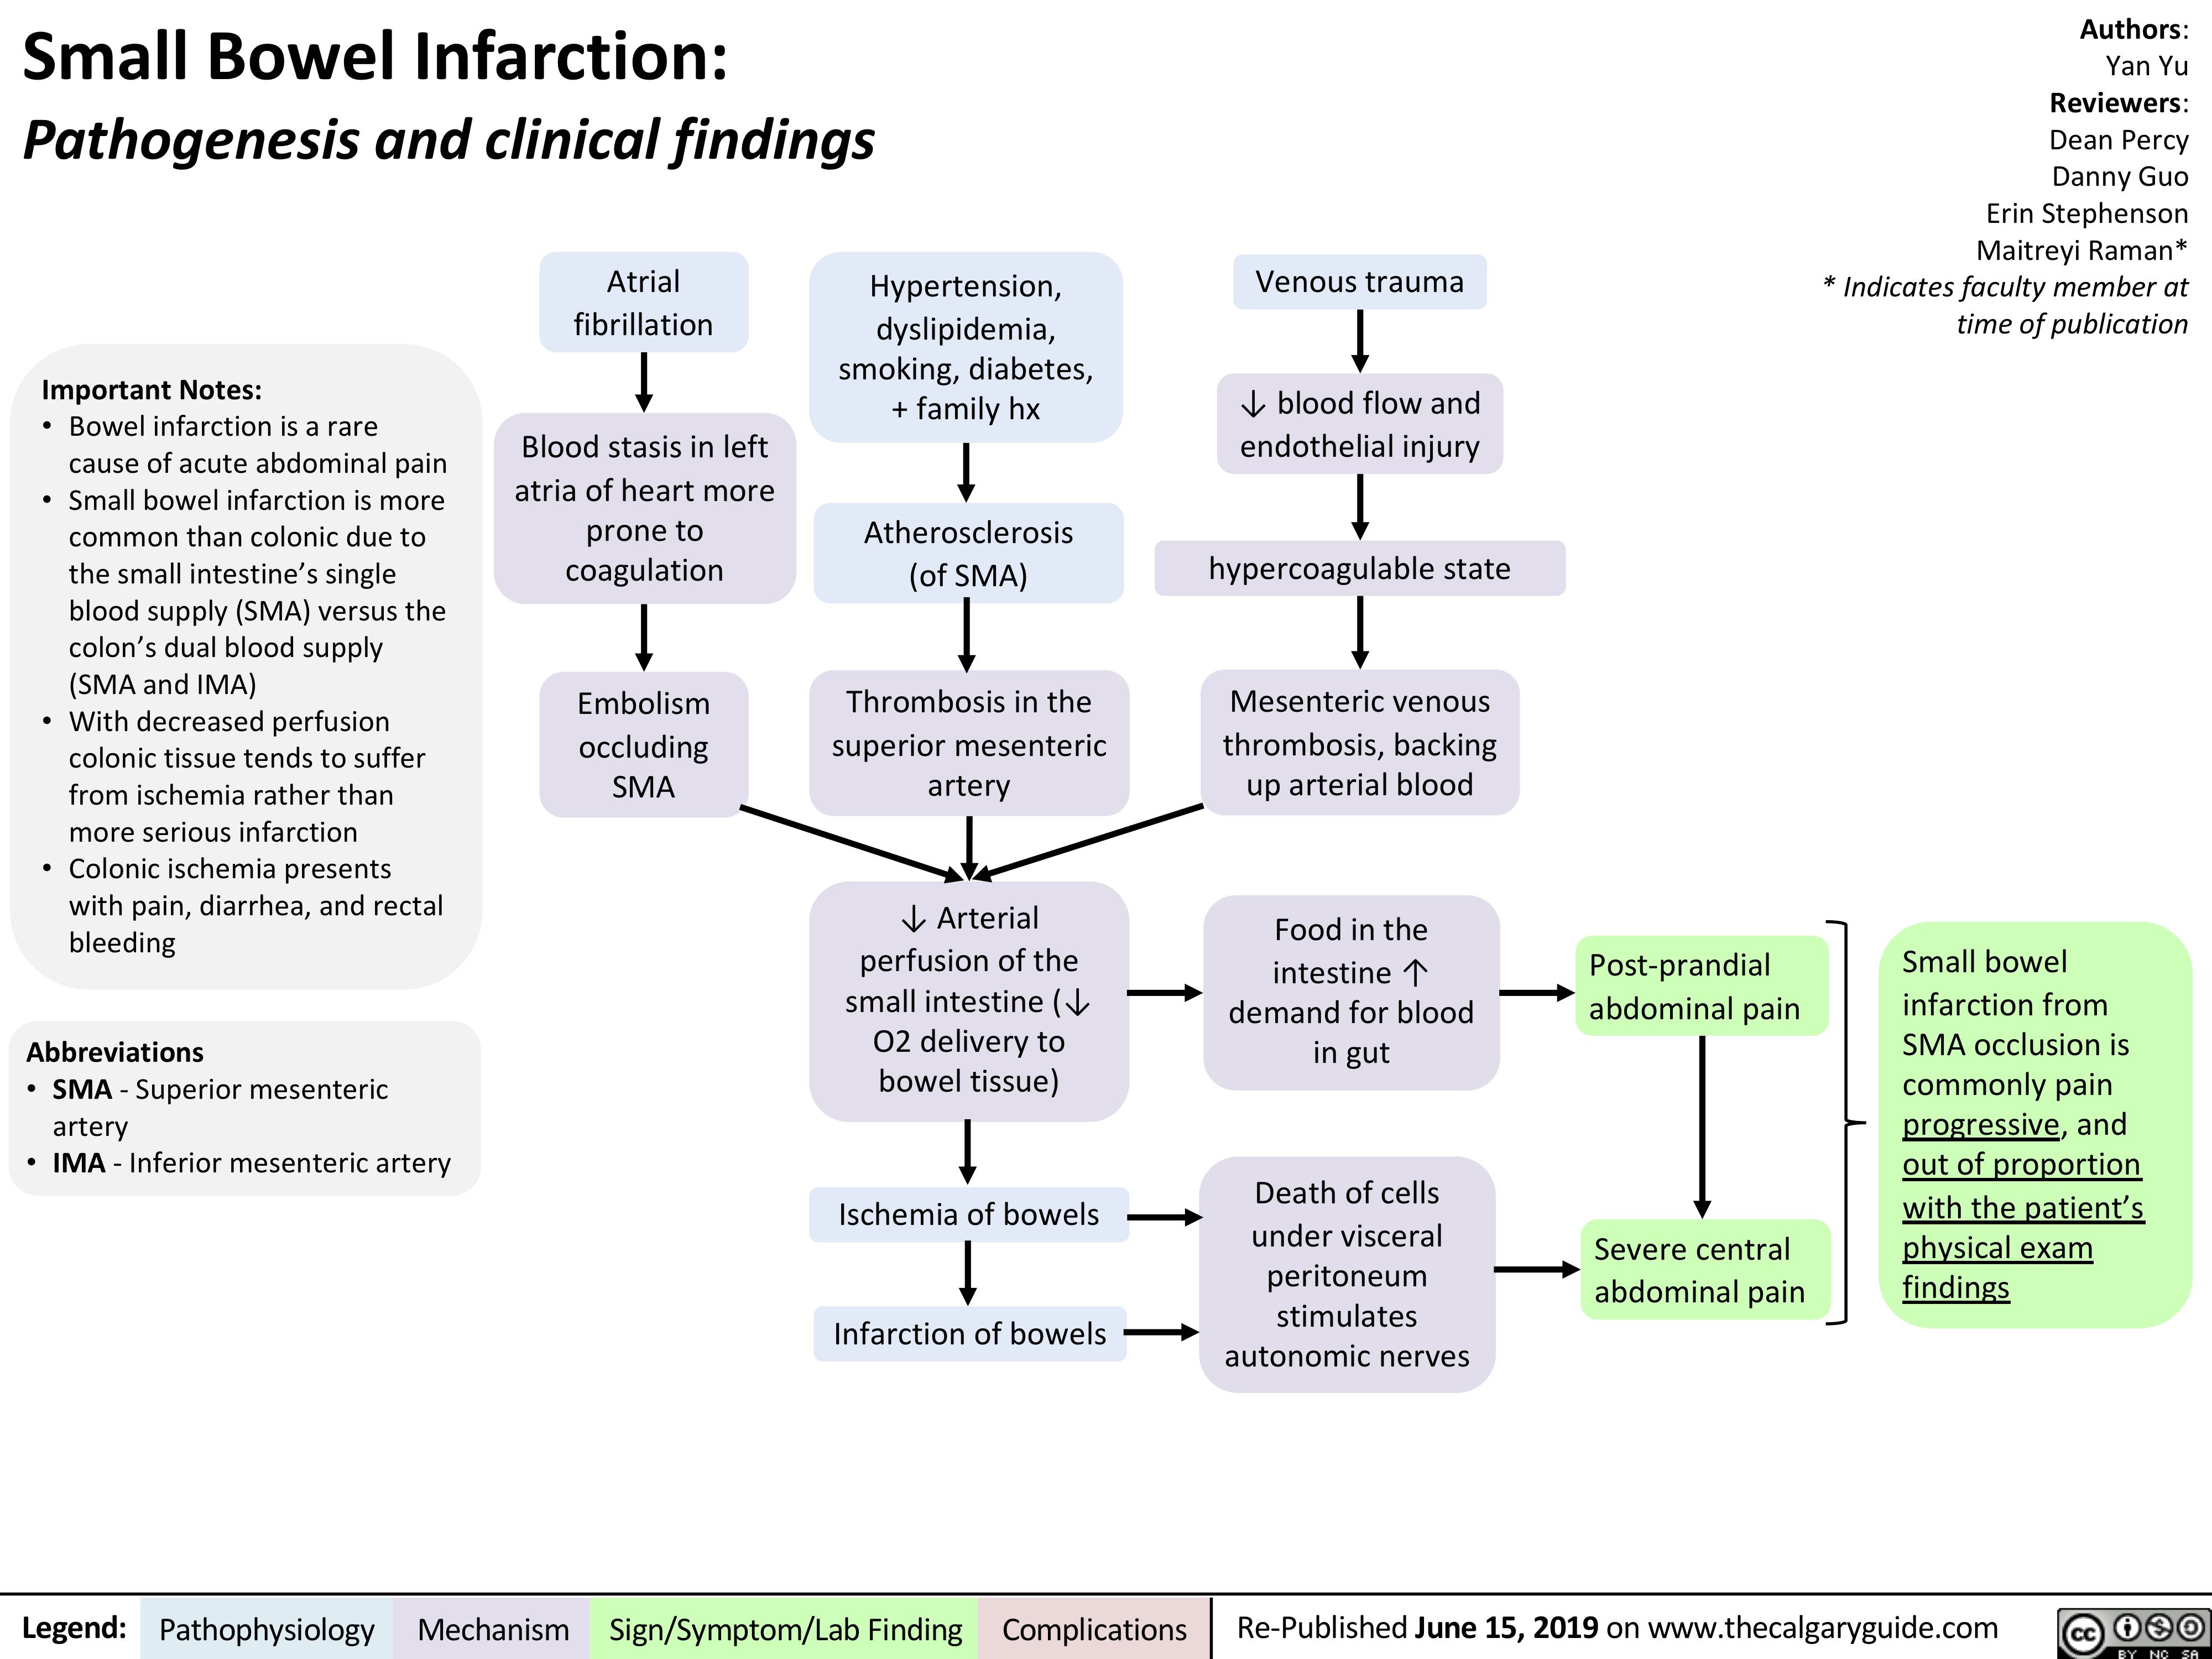 Small Bowel Infarction:
Pathogenesis and clinical findings
Authors: Yan Yu Reviewers: Dean Percy Danny Guo Erin Stephenson Maitreyi Raman* * Indicates faculty member at time of publication
      Important Notes:
• Bowel infarction is a rare cause of acute abdominal pain
• Small bowel infarction is more
common than colonic due to the small intestine’s single blood supply (SMA) versus the colon’s dual blood supply (SMA and IMA)
• With decreased perfusion colonic tissue tends to suffer from ischemia rather than more serious infarction
• Colonic ischemia presents with pain, diarrhea, and rectal bleeding
Abbreviations
• SMA - Superior mesenteric
artery
• IMA - Inferior mesenteric artery
Atrial fibrillation
Blood stasis in left atria of heart more
prone to coagulation
Embolism occluding SMA
Hypertension, dyslipidemia, smoking, diabetes, + family hx
Atherosclerosis (of SMA)
Thrombosis in the superior mesenteric artery
↓ Arterial perfusion of the small intestine (↓ O2 delivery to bowel tissue)
Ischemia of bowels Infarction of bowels
Venous trauma
↓ blood flow and endothelial injury
hypercoagulable state
Mesenteric venous thrombosis, backing up arterial blood
Food in the
intestine ↑ demand for blood in gut
Death of cells under visceral peritoneum stimulates autonomic nerves
                   Post-prandial abdominal pain
Severe central abdominal pain
Small bowel infarction from
SMA occlusion is commonly pain progressive, and out of proportion with the patient’s physical exam findings
                   Legend:
 Pathophysiology
 Mechanism
Sign/Symptom/Lab Finding
  Complications
Re-Published June 15, 2019 on www.thecalgaryguide.com
   